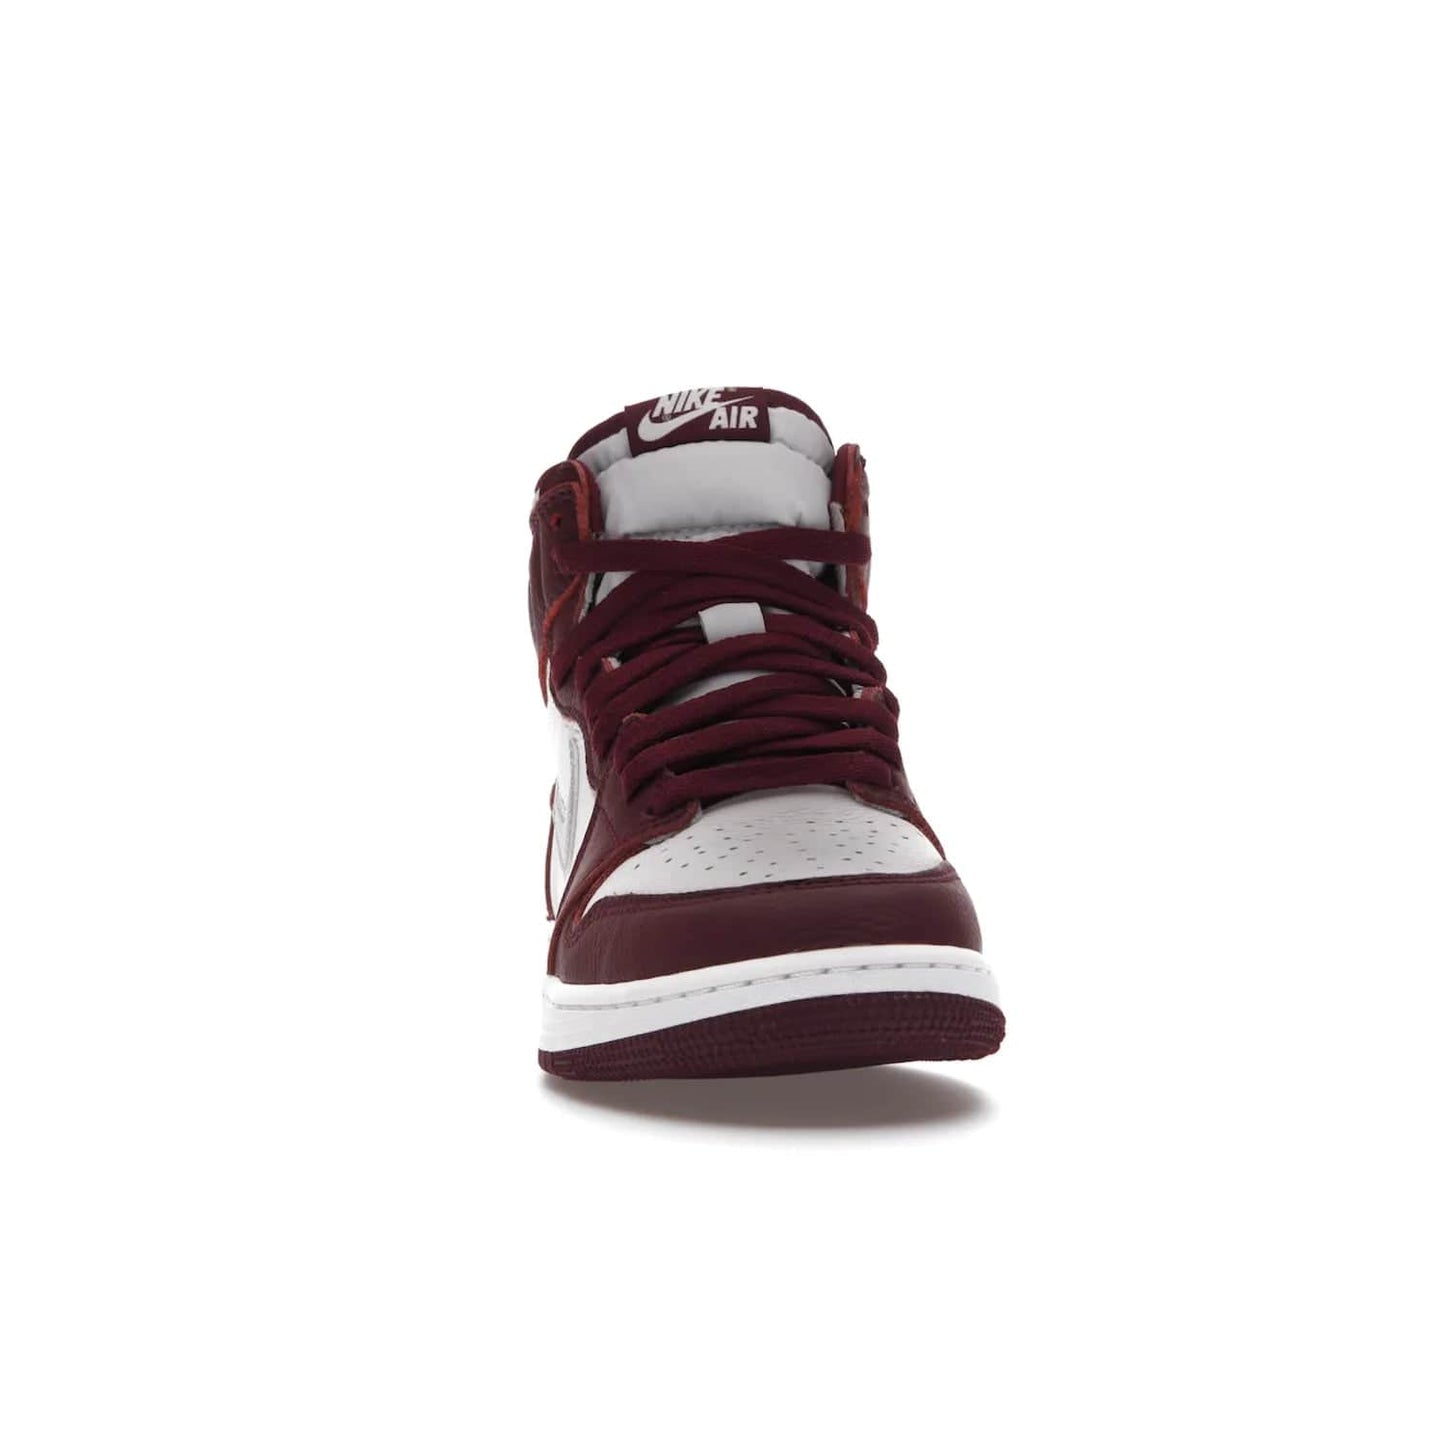 Jordan 1 Retro High OG Bordeaux (GS) - Image 9 - Only at www.BallersClubKickz.com - #
Introducing the Air Jordan 1 Retro High OG Bordeaux GS – a signature colorway part of the Jordan Brand Fall 2021 lineup. White leather upper & Bordeaux overlays, metallic silver swoosh, jeweled Air Jordan Wings logo & more. Step up your style game with this sleek fall season silhouette.